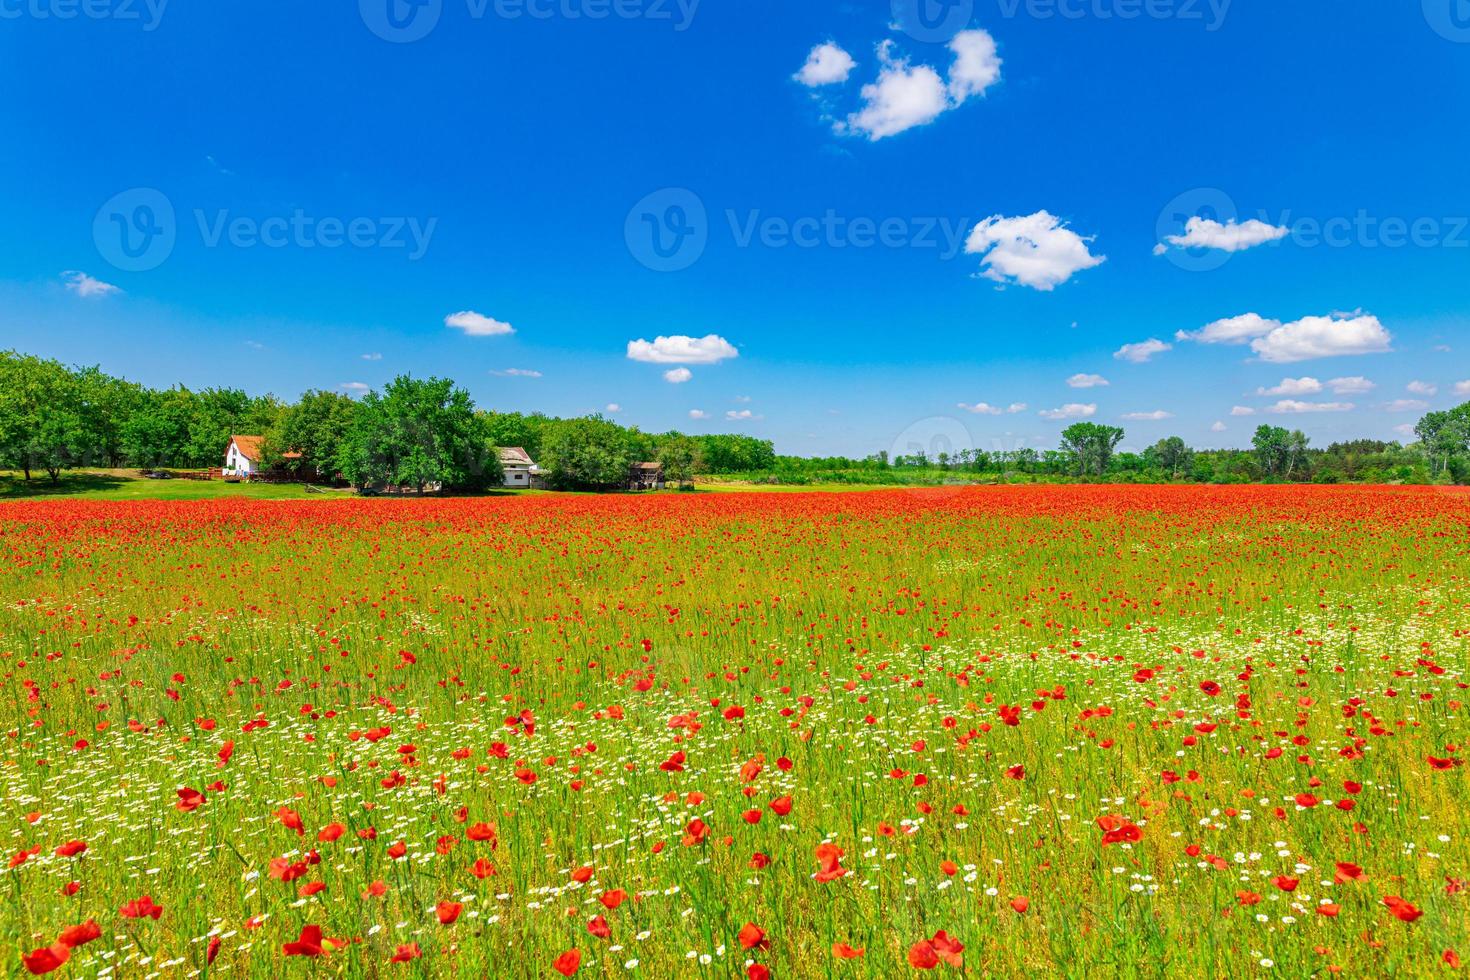 Panorama of poppy field in summer countryside. Red poppy flowers blooming in the springtime nature landscape. Idyllic scenic view photo